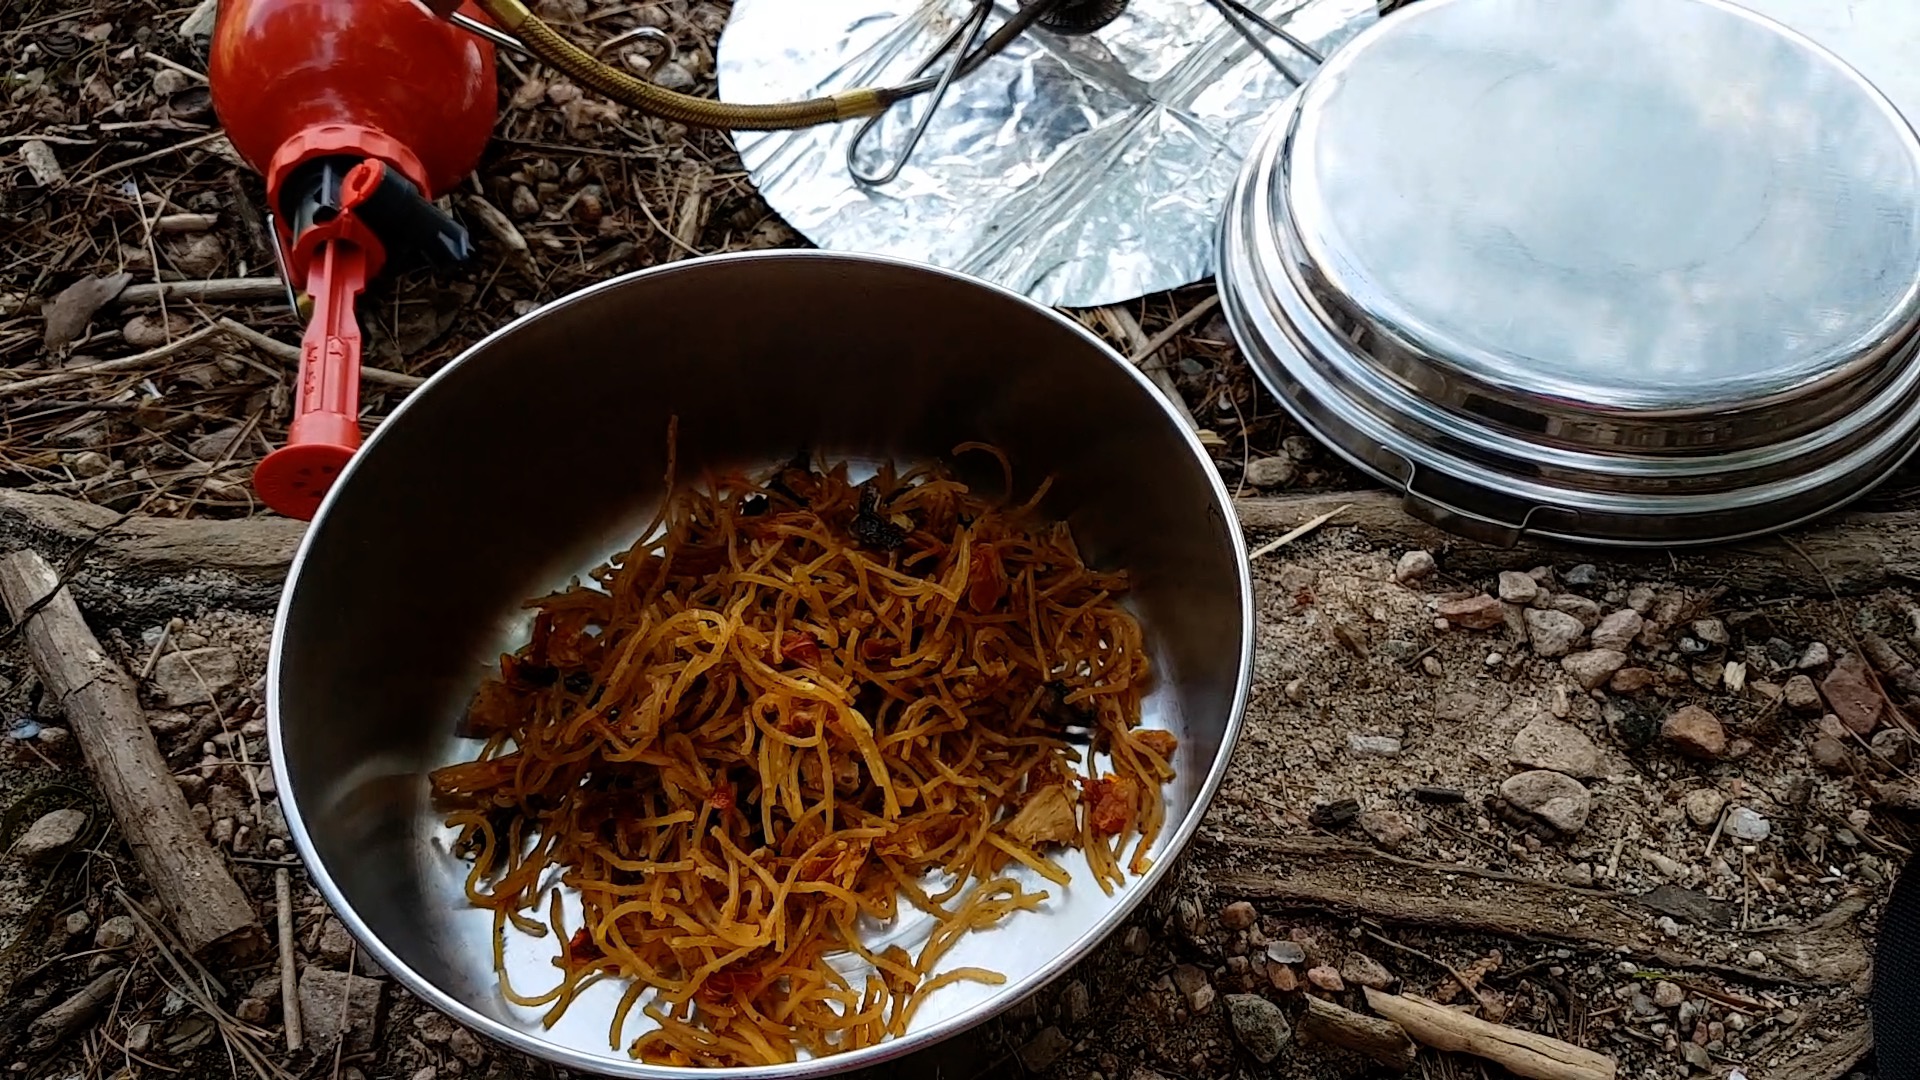 cook-dry Cooking Dehydrated Rustic Spaghetti At Bon Echo Provincial Park - Watch The Video!